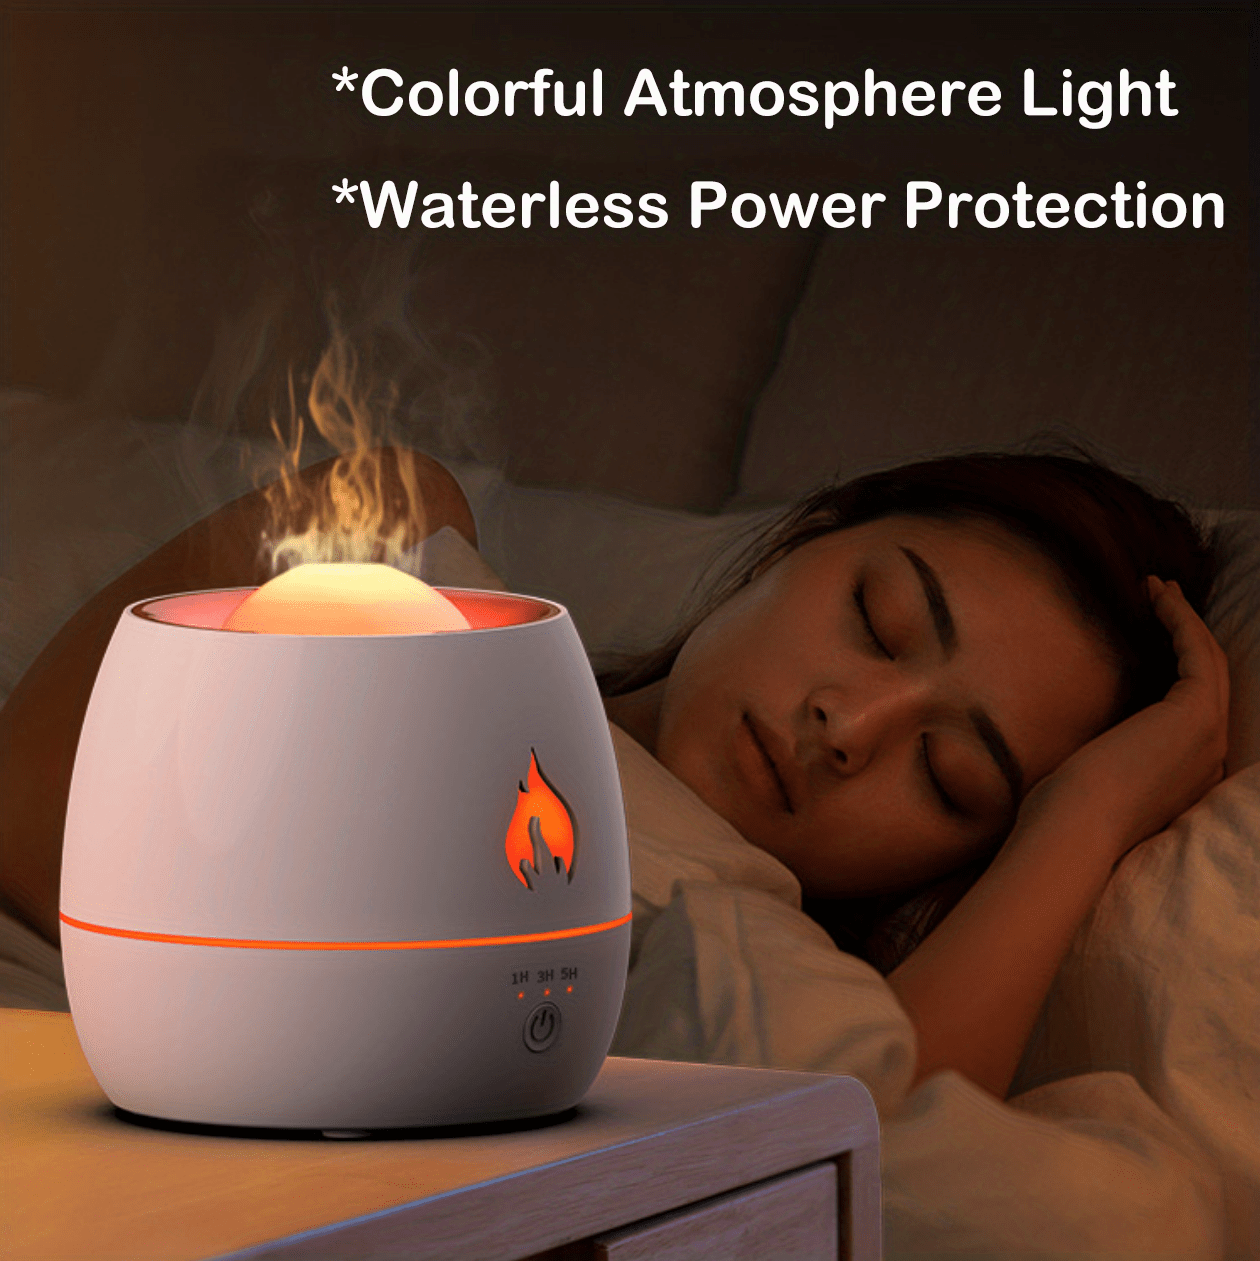 2 in 1 aromatherapy humidifier flame humidifier flame aromatherapy machine colorful night light ultrasonic aromatherapy machine atmosphere light usb humidifier mini desktop humidifier details 4